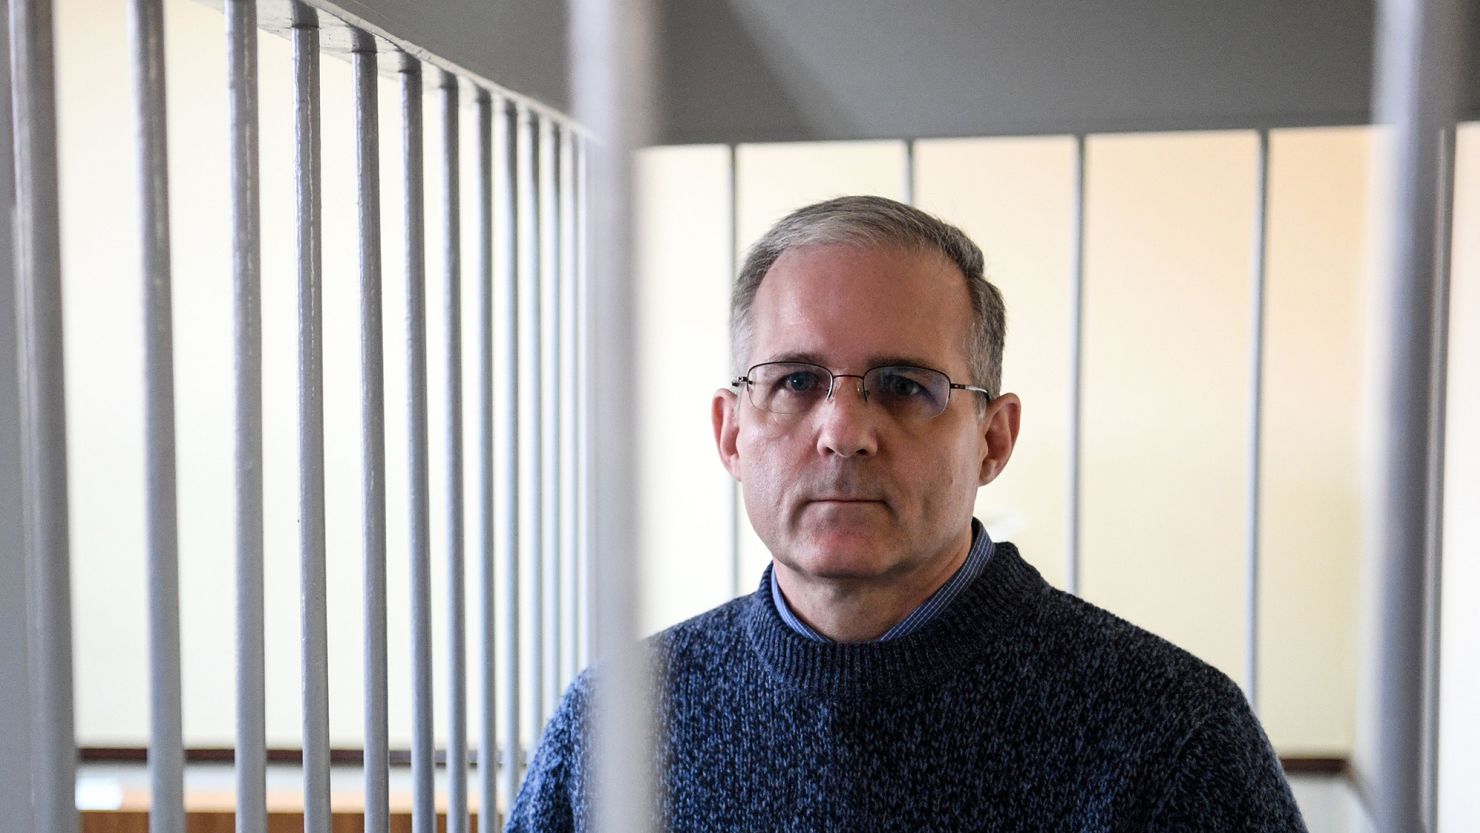 Paul Whelan stands inside a defendants' cage during a hearing at a court in Moscow on August 23, 2019. 